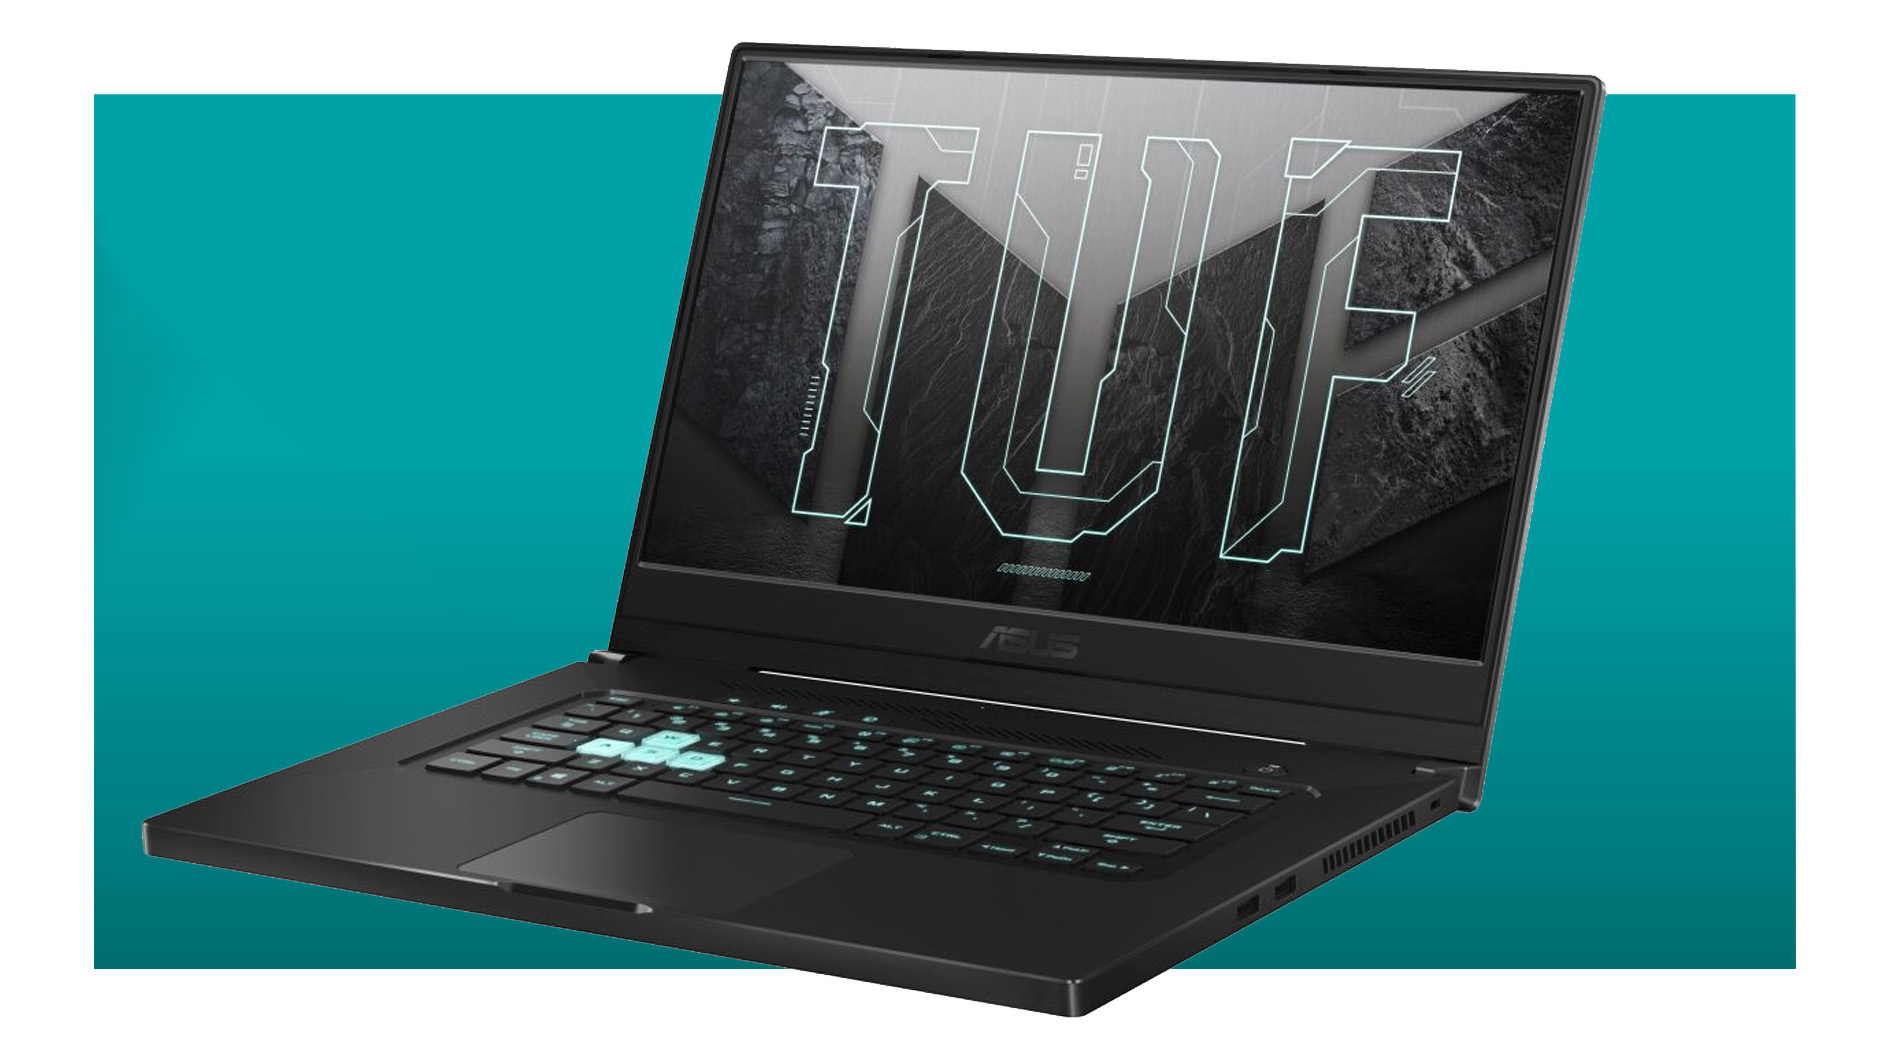  Take an extra 10% off this Asus RTX 3060 gaming laptop, now down to £810 